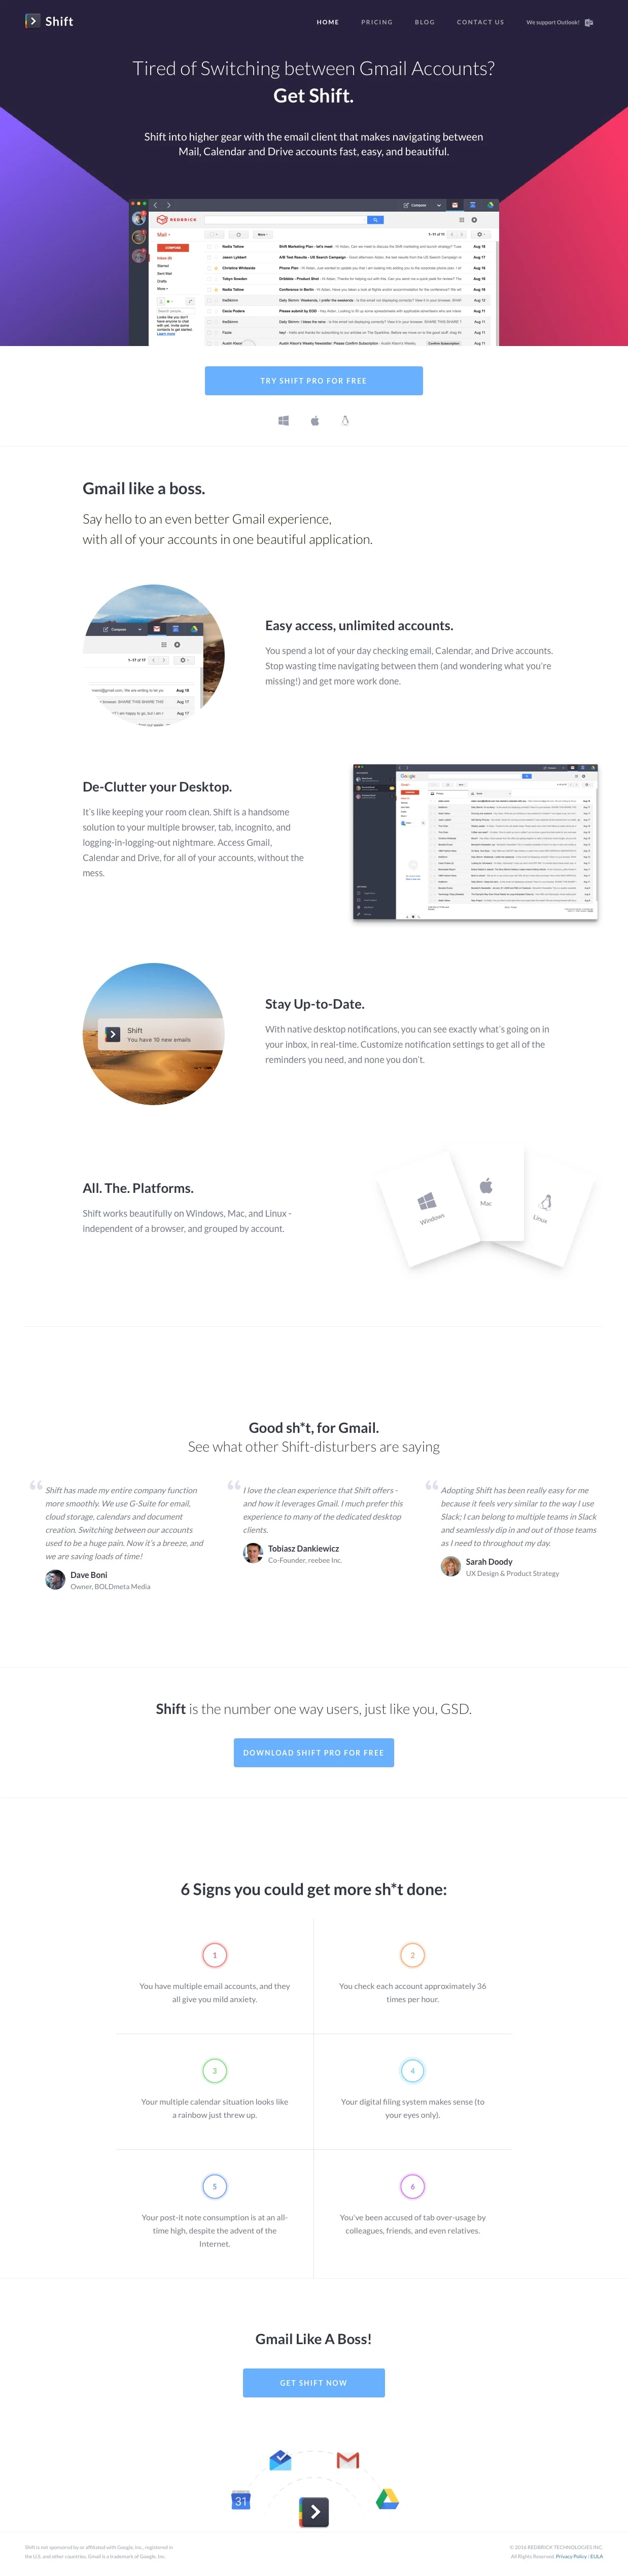 Shift Landing Page Example: Tired of Switching between Gmail Accounts? Get Shift.